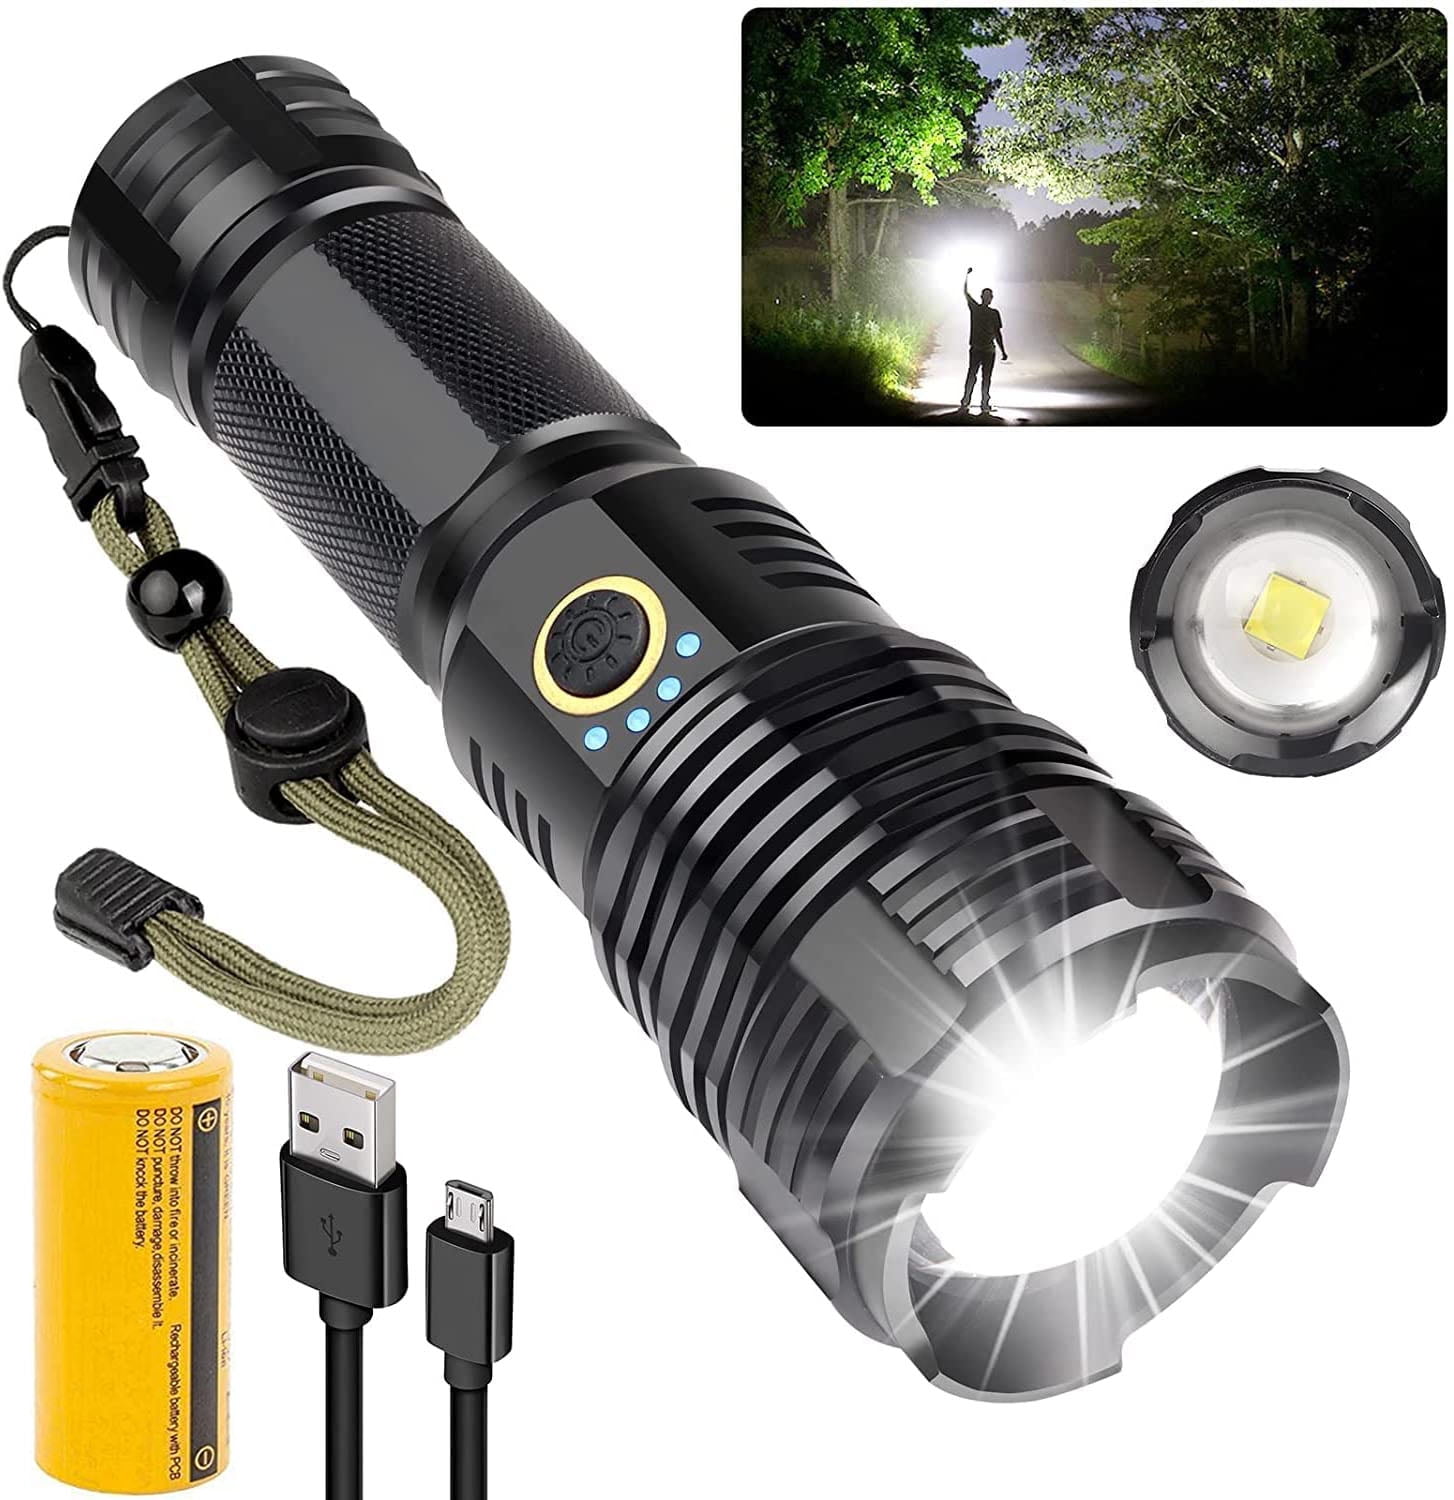 Rechargeable Flashlight High Lumens,90000 Lumen Super Bright LED Flashlight  with Modes,LED Waterproof Handheld Flashlight for Home,Camping,Emergencies  Black